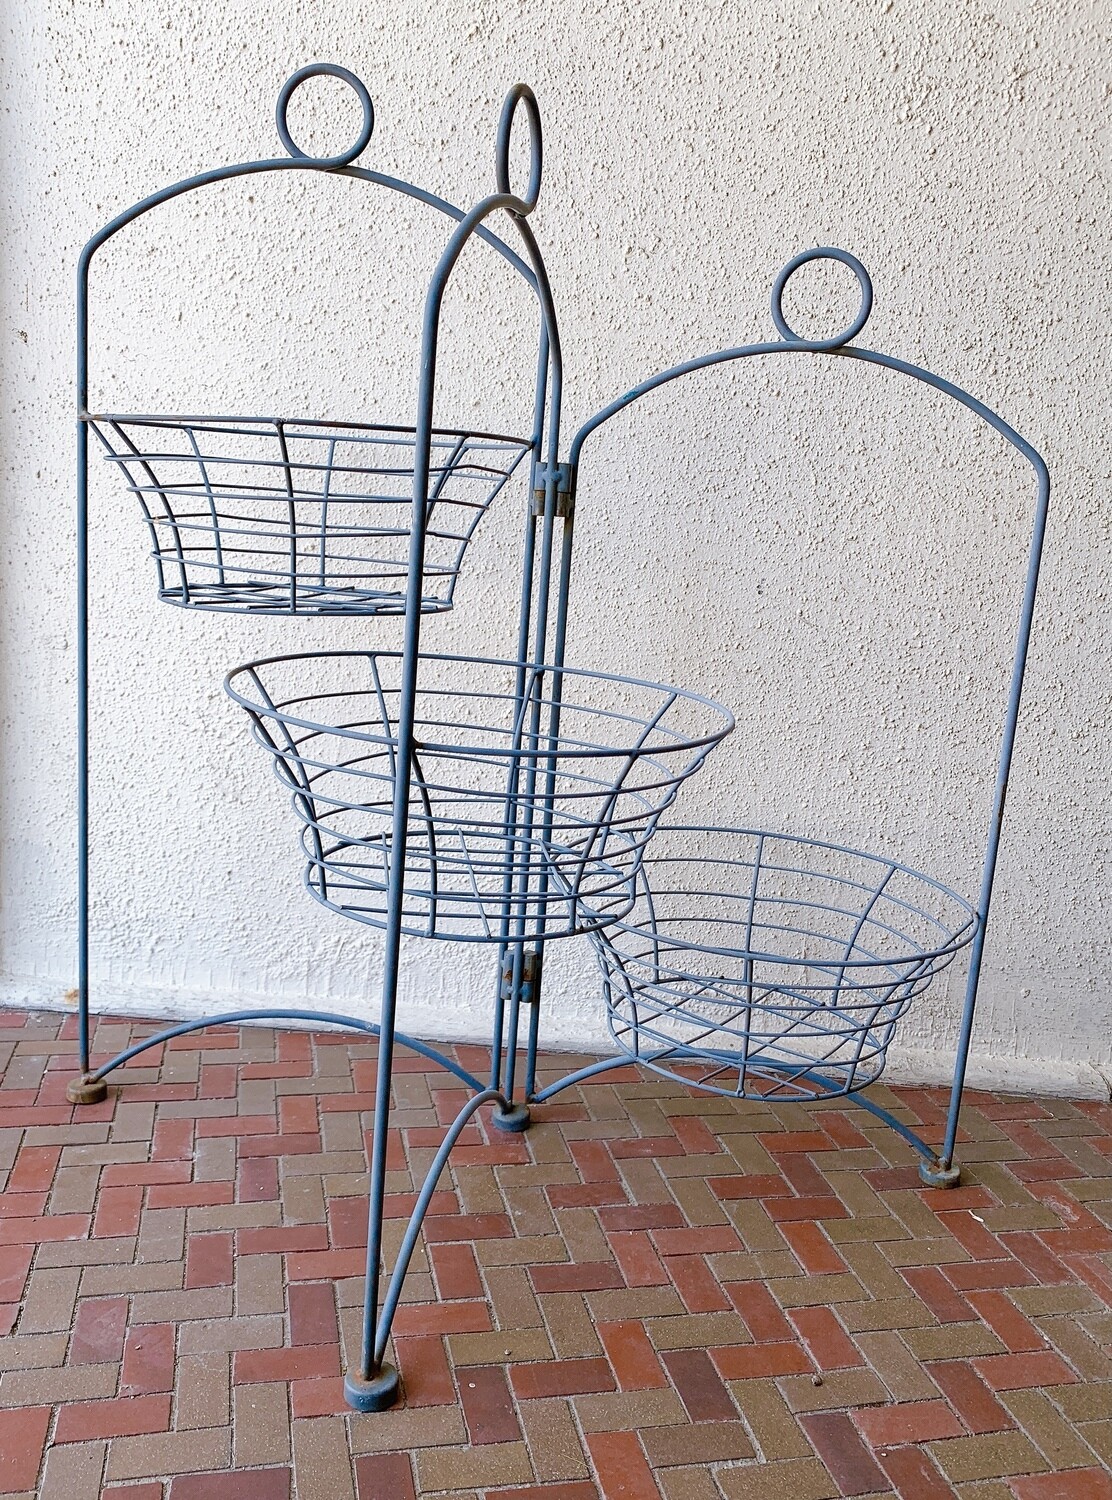 3 Tier Basket Stand - grey, foldable